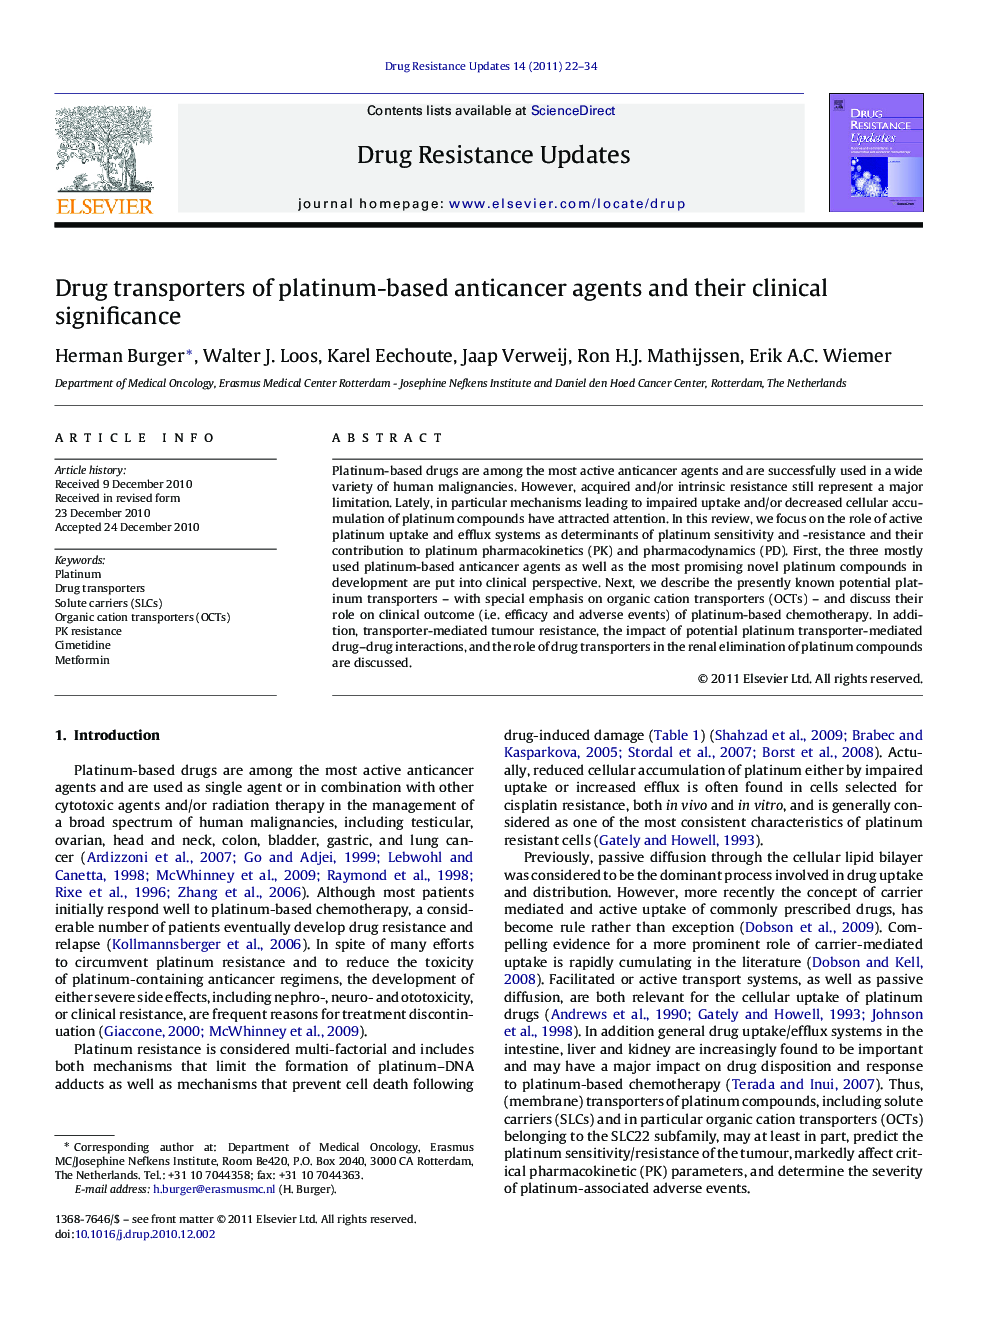 Drug transporters of platinum-based anticancer agents and their clinical significance